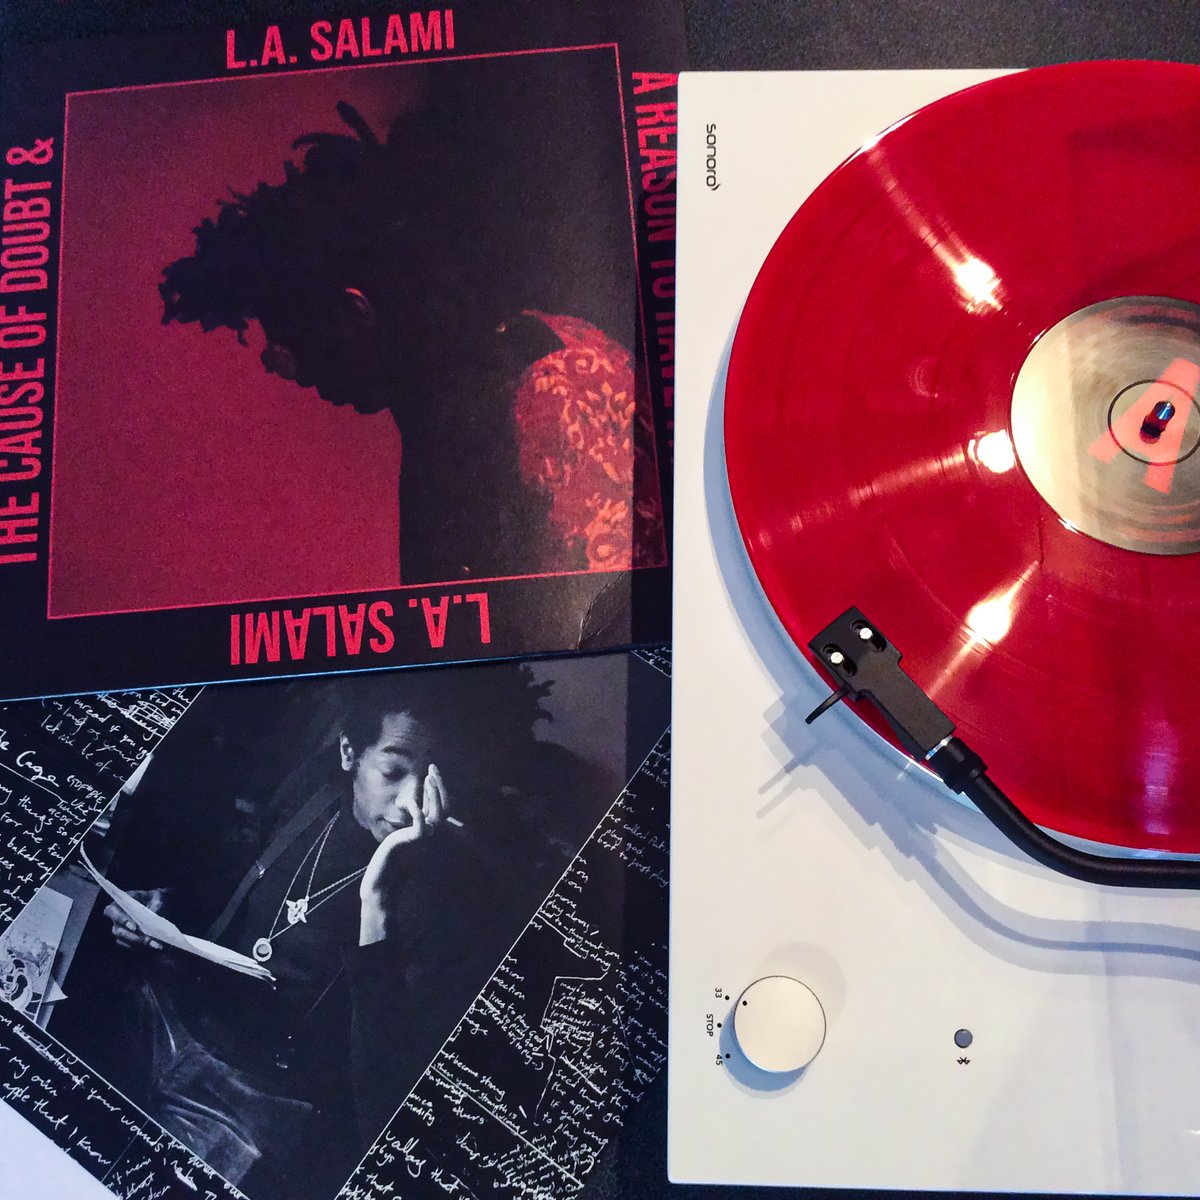 L.A. Salami / The Cause Of Doubt & A Reason To Have Faith (2020); Desperate ambient folk pop that also keeps getting closer to the blues. #LASalami #Folk #PostBlues #AmbientFolk #AmbientPop #Singer #Songwriter #Indiemusic #music #musiclover #musiclovers #vinylcollection #vinyl